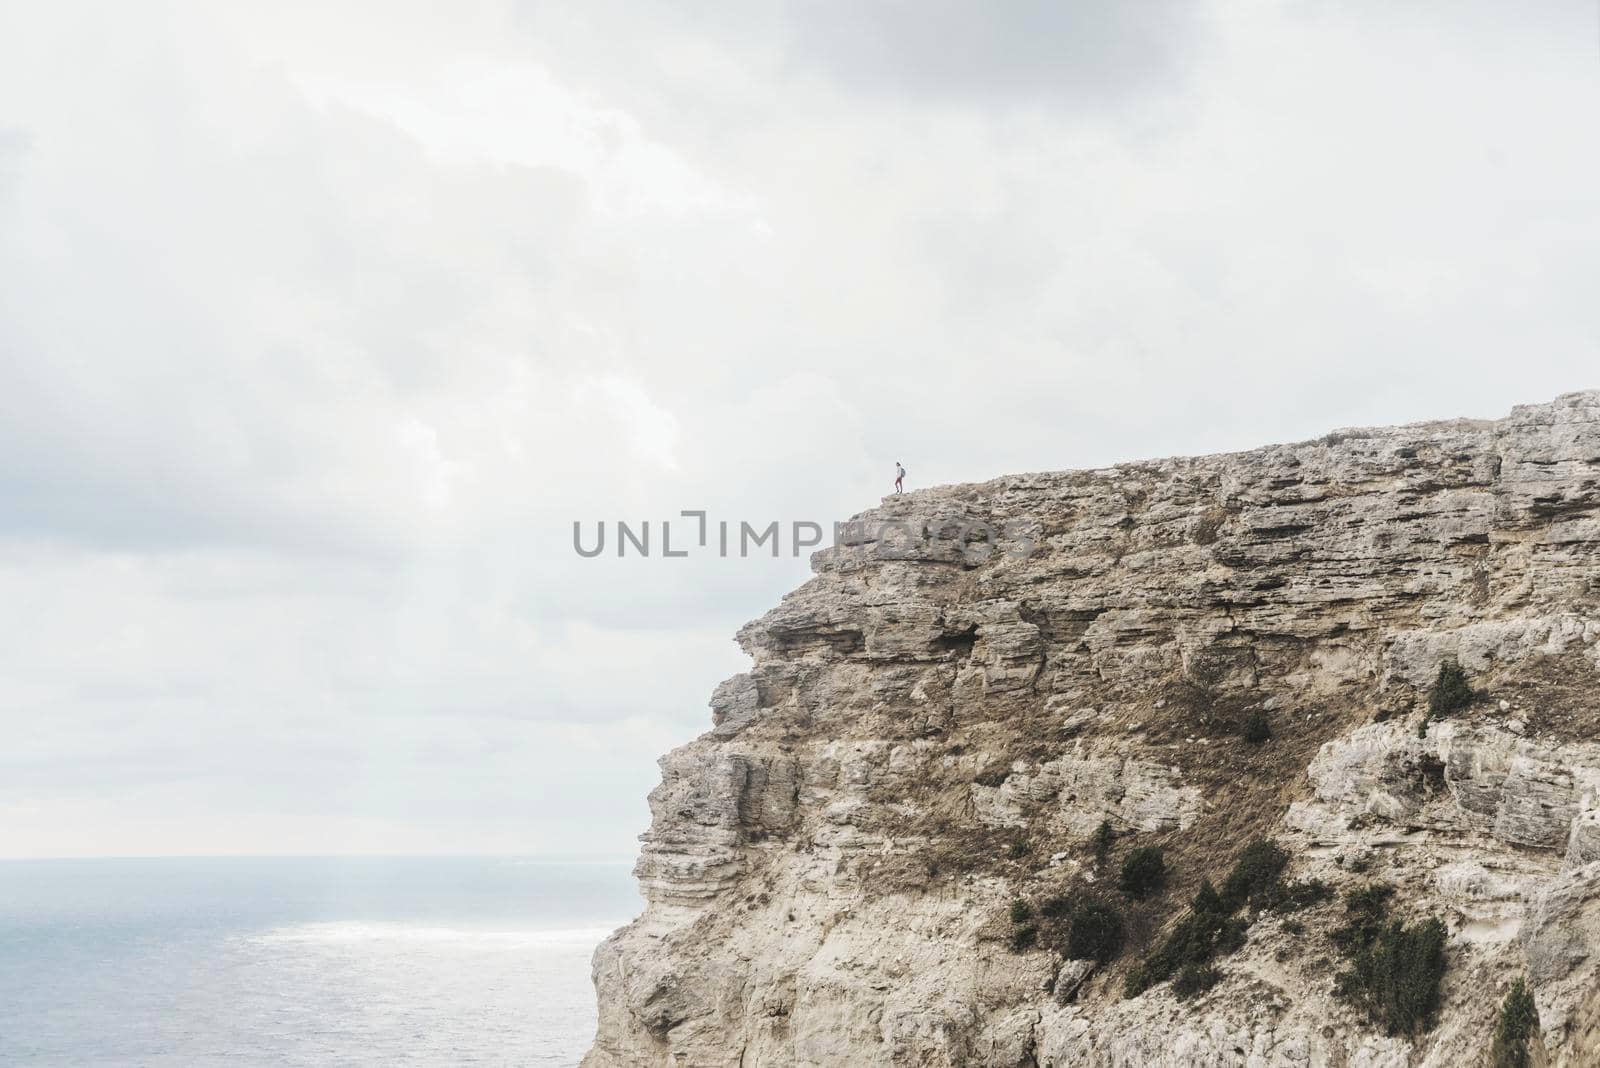 Small figure of female traveler standing on edge of cliff over sea on background of cloudy sky. Concept of minimal person in massive landscape.